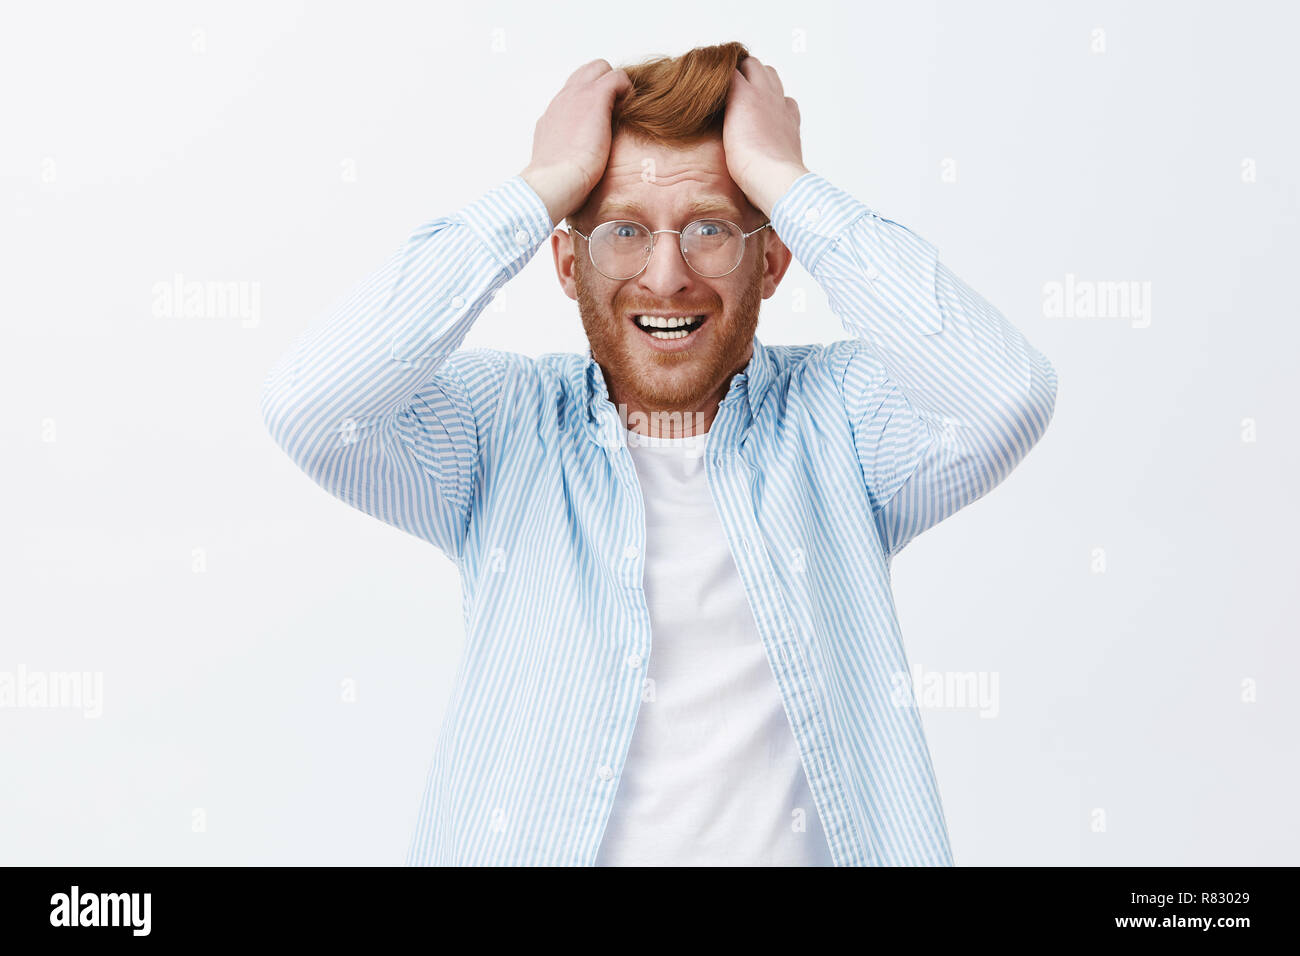 Studio shot of upset redhead man in despair and shook, feeling distressed losing company, pulling hair out of head, frowning and grimacing from painful feelings, standing over gray background Stock Photo